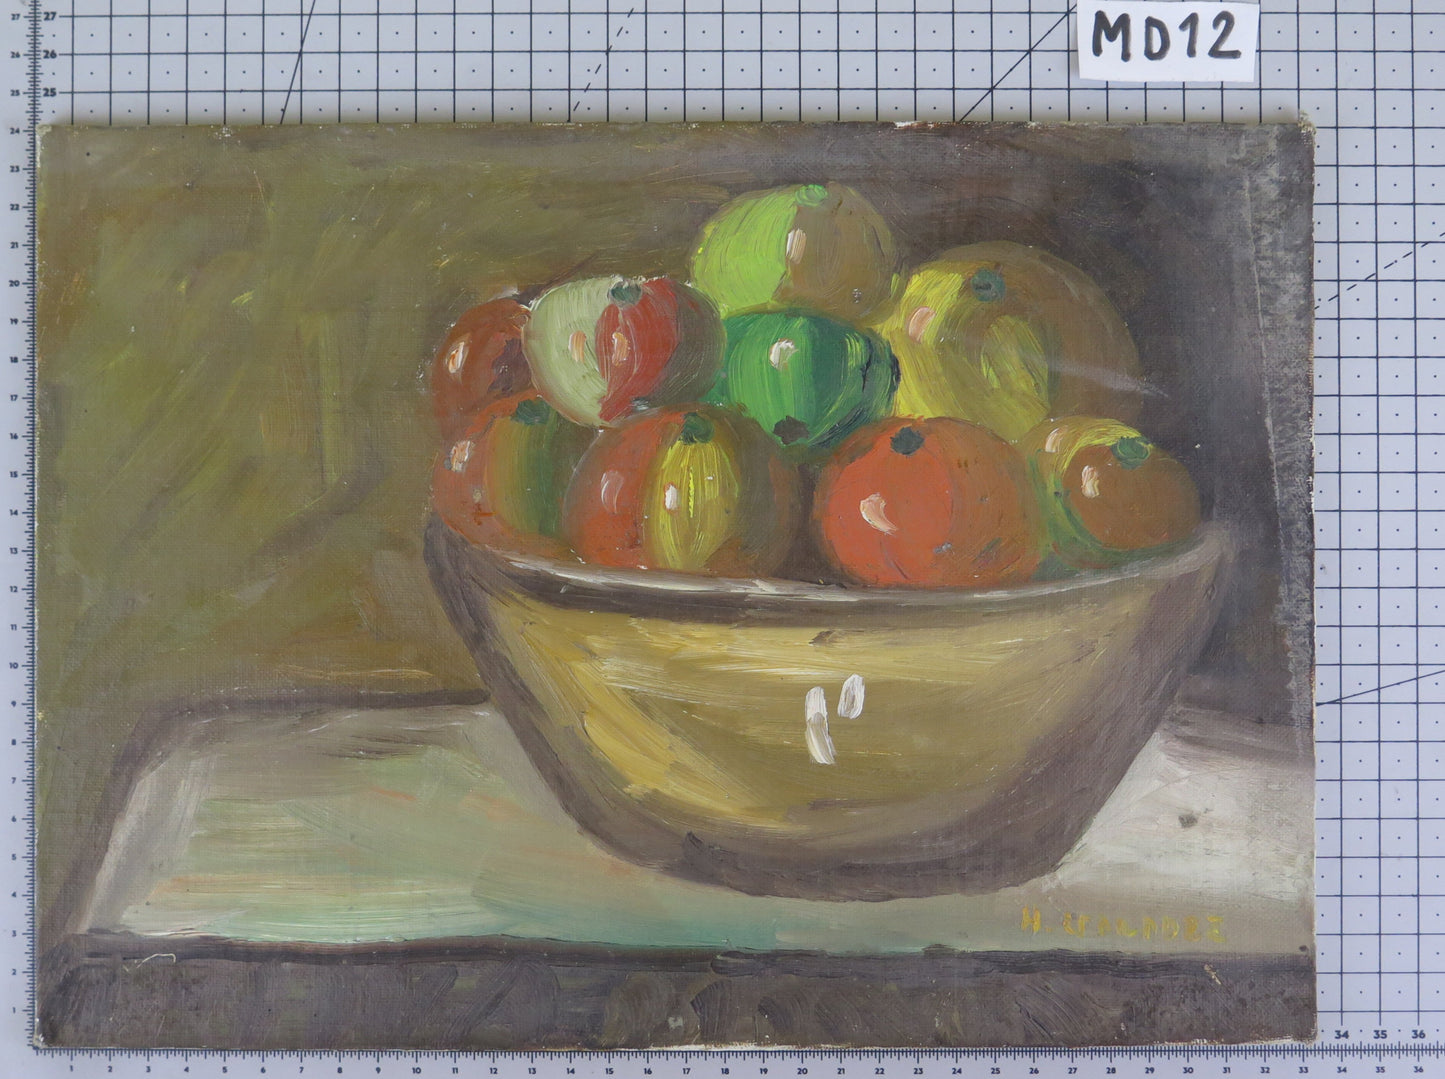 OLD OIL PAINTING STILL LIFE WORK BY SPANISH PAINTER HERRANZ MD12